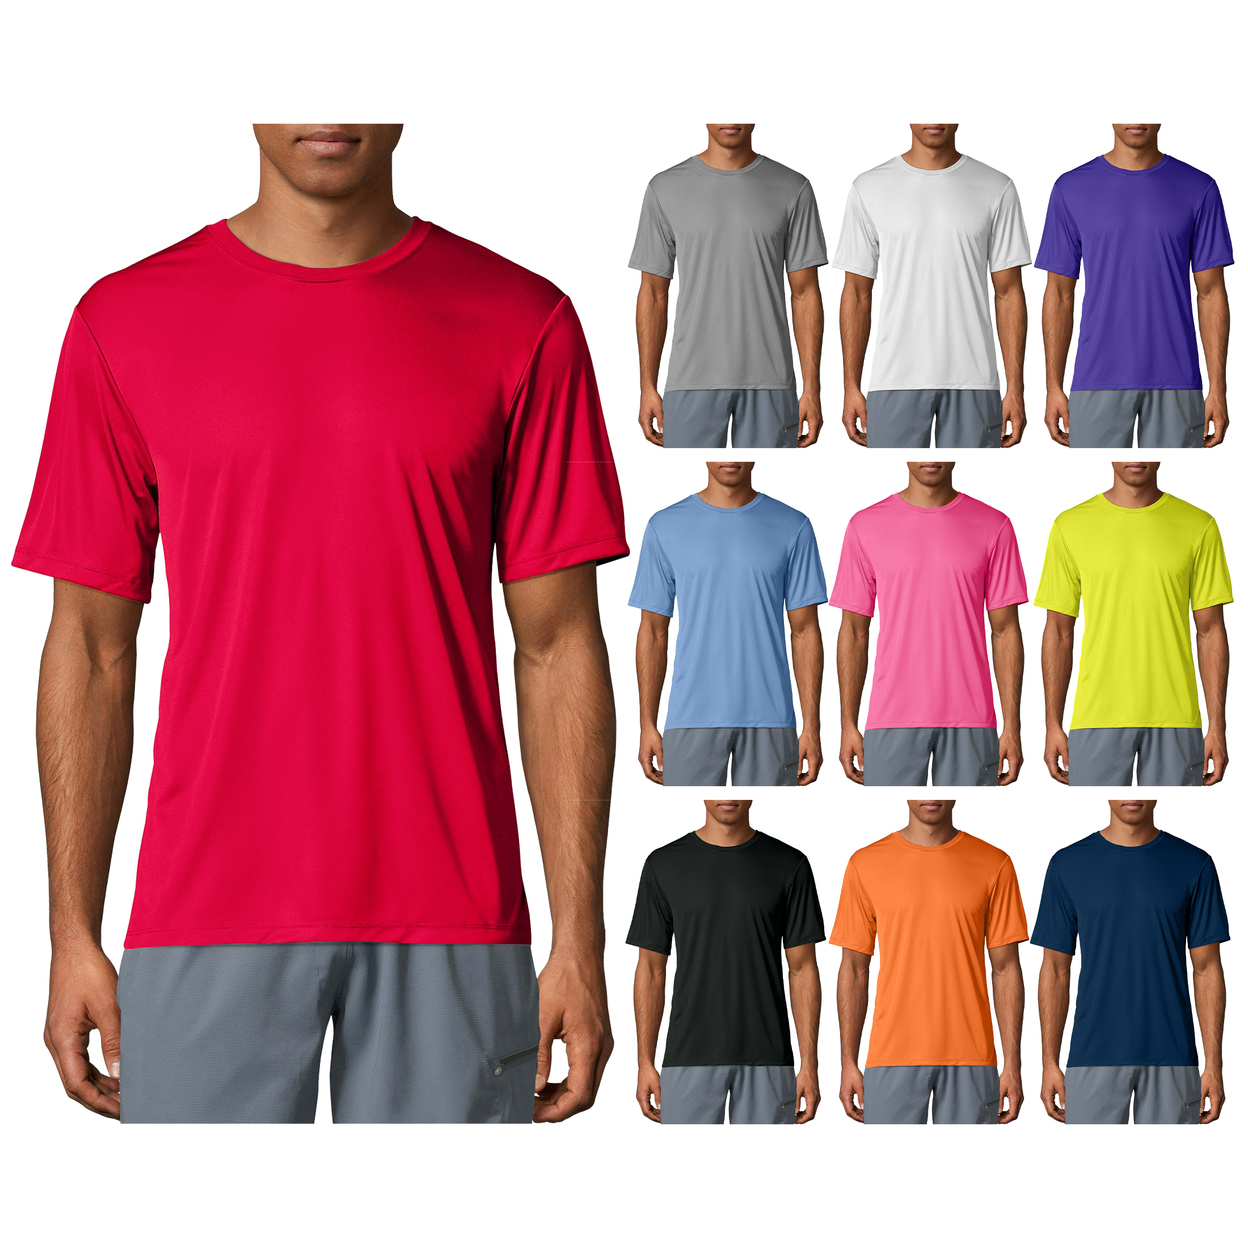 Multi-Pack: Men's Moisture Wicking Cool Dri-Fit Performance Short Sleeve Crew Neck T-Shirts - 1-pack, Large